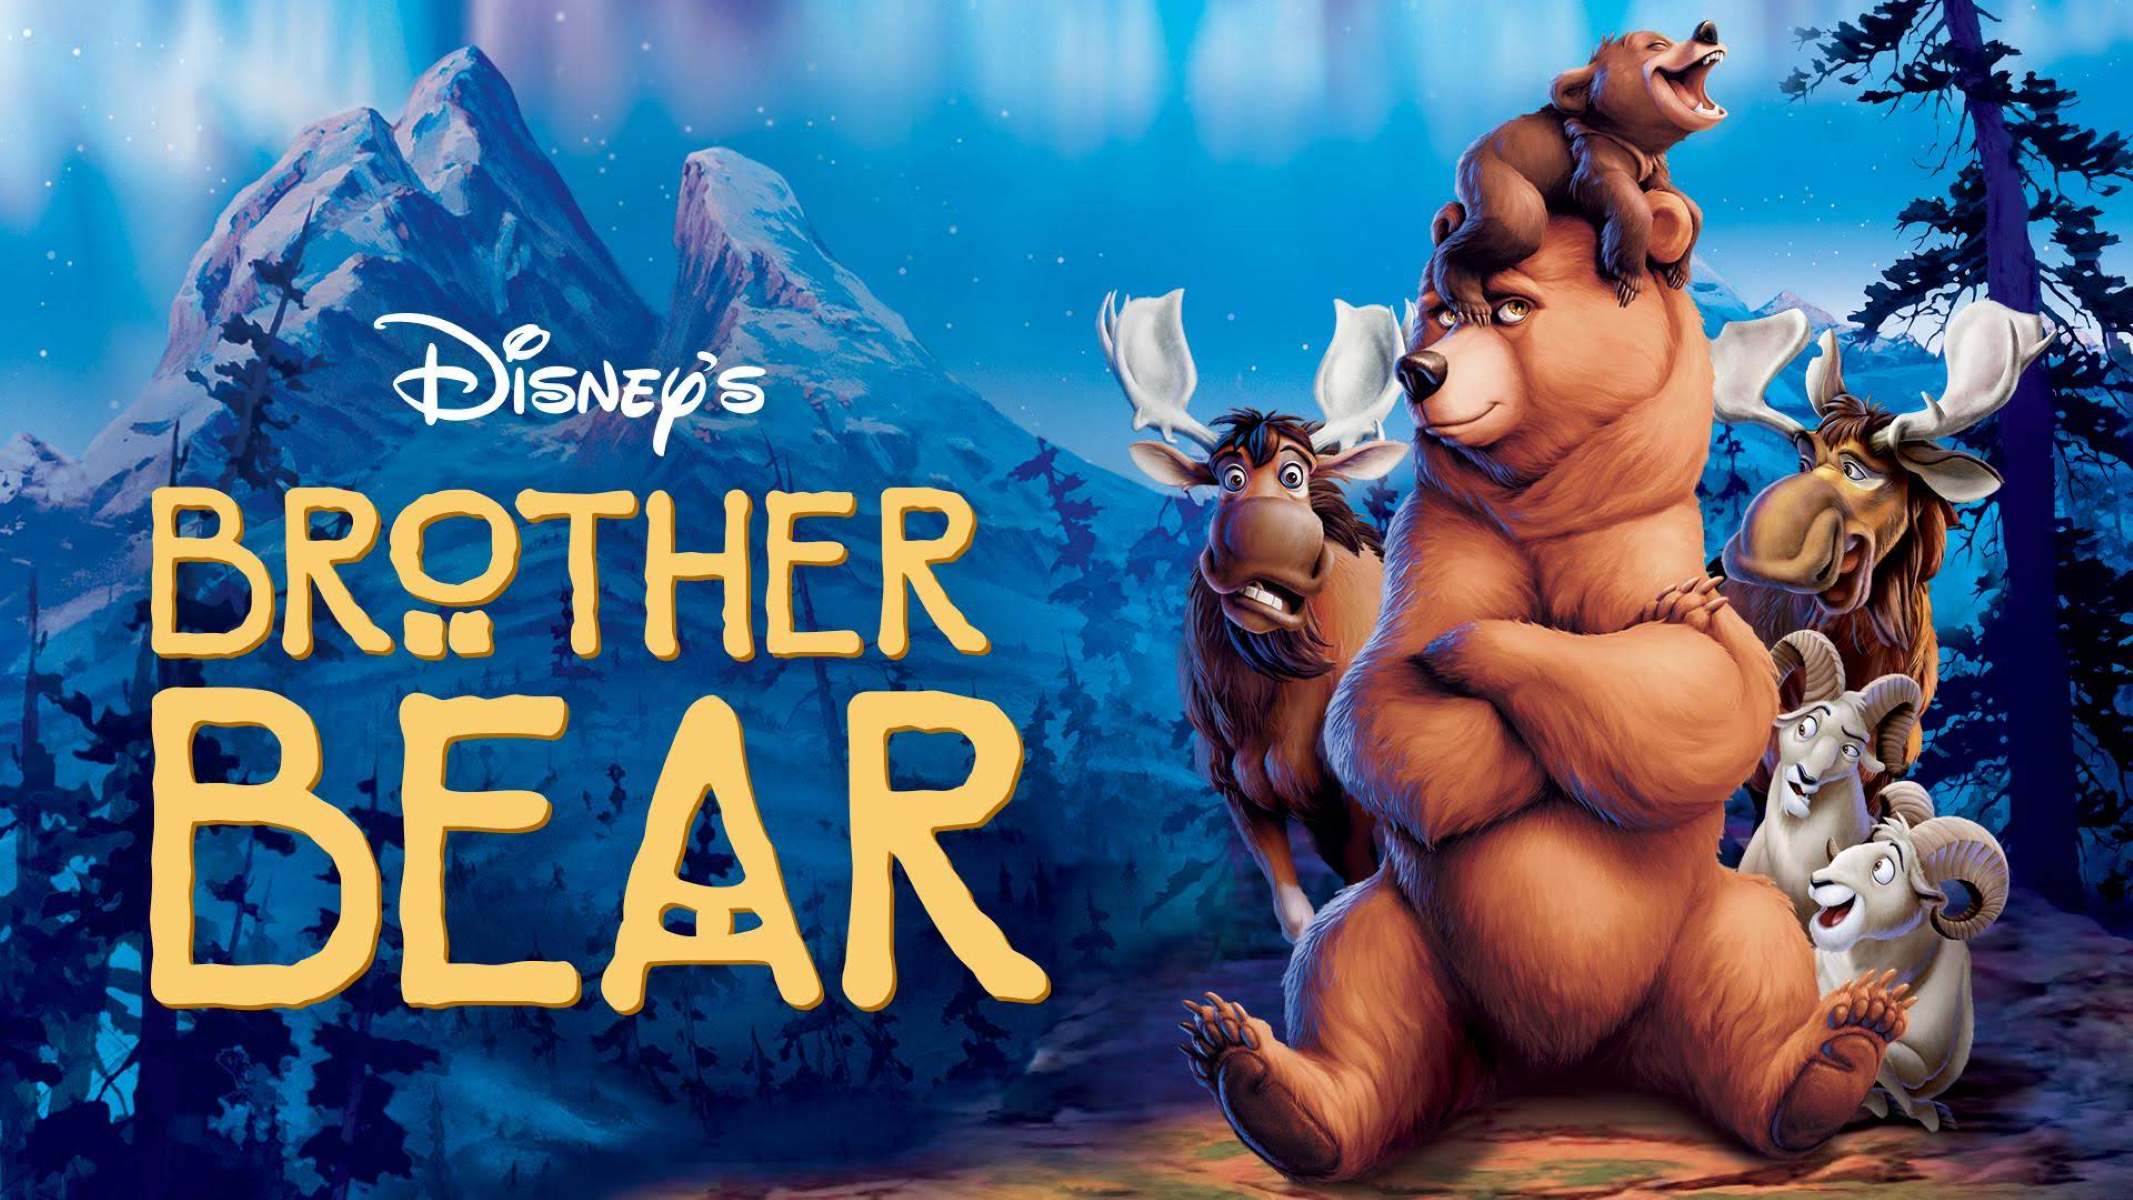 39-facts-about-the-movie-brother-bear